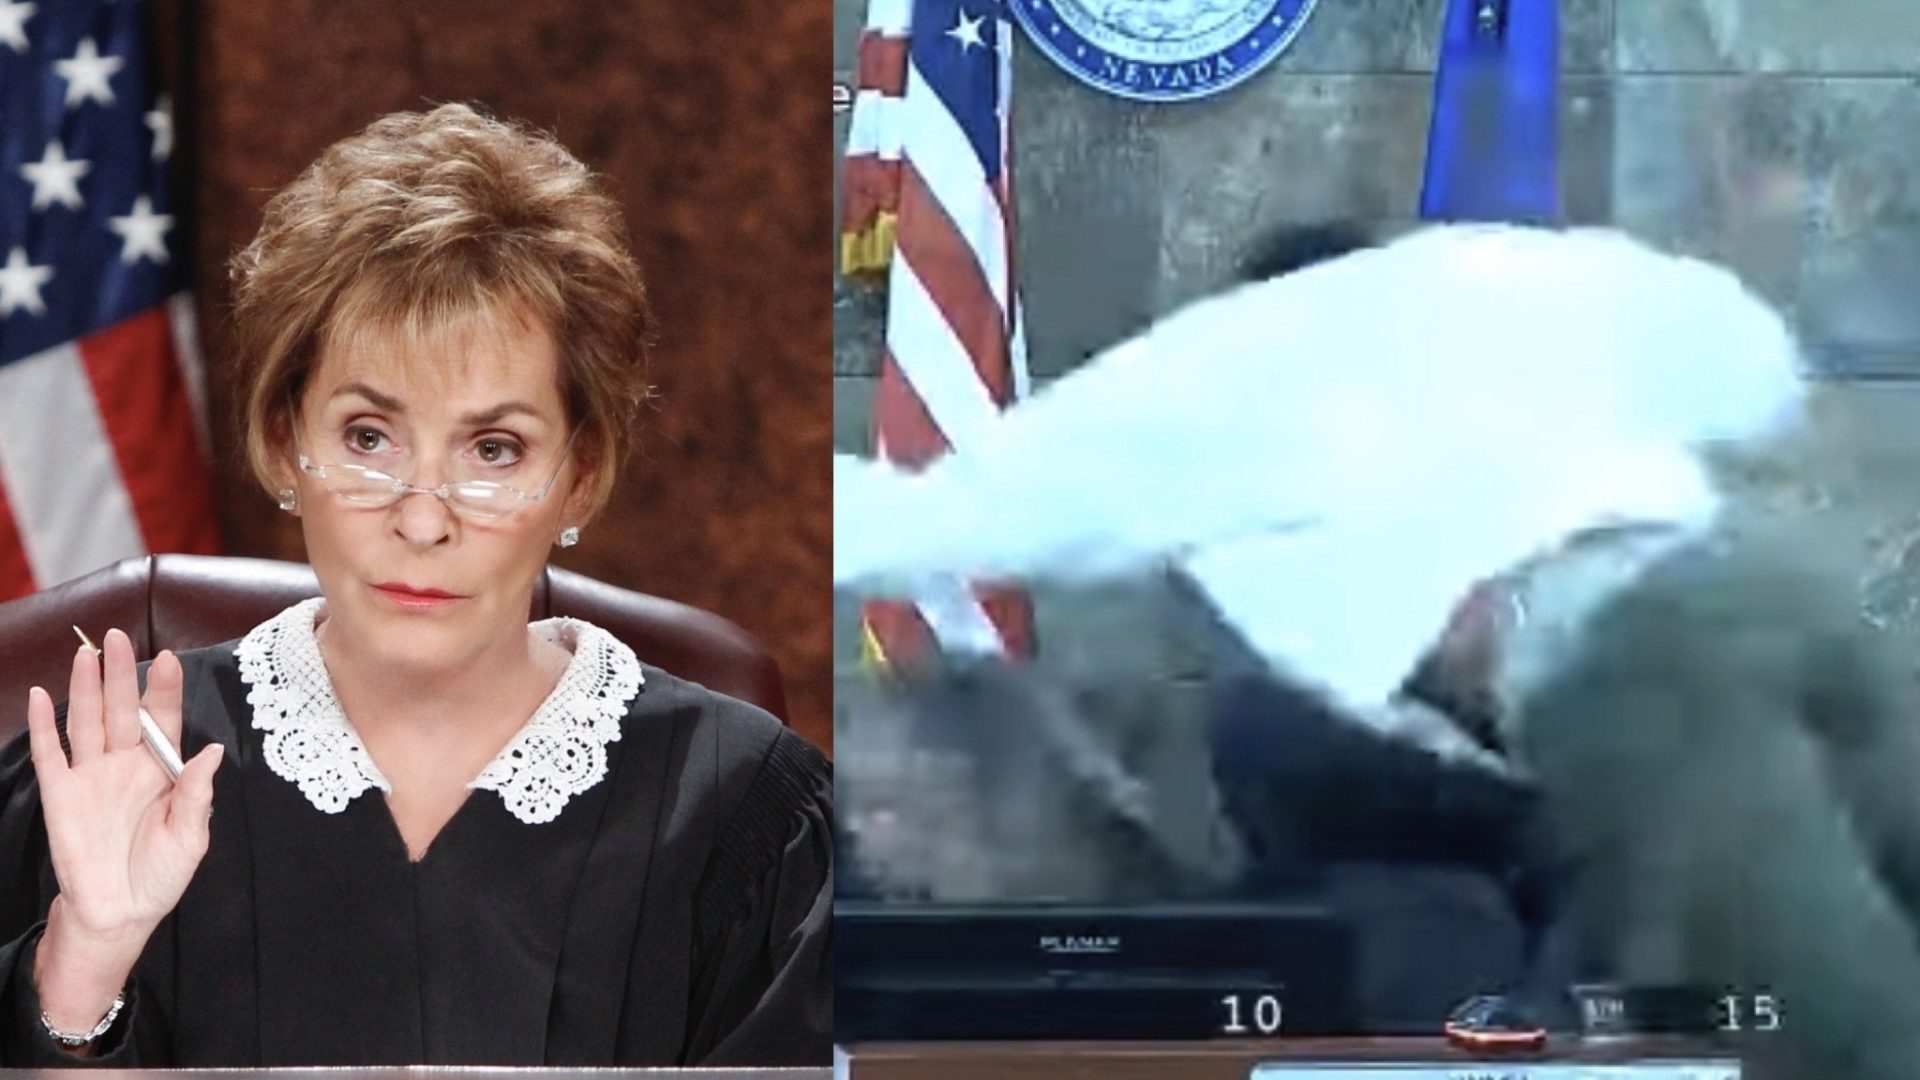 Not Today Watch As Judge Judy Reacts To Viral Video Of Man Who Leaped Over Podium Attacked Las Vegas Judge Video scaled